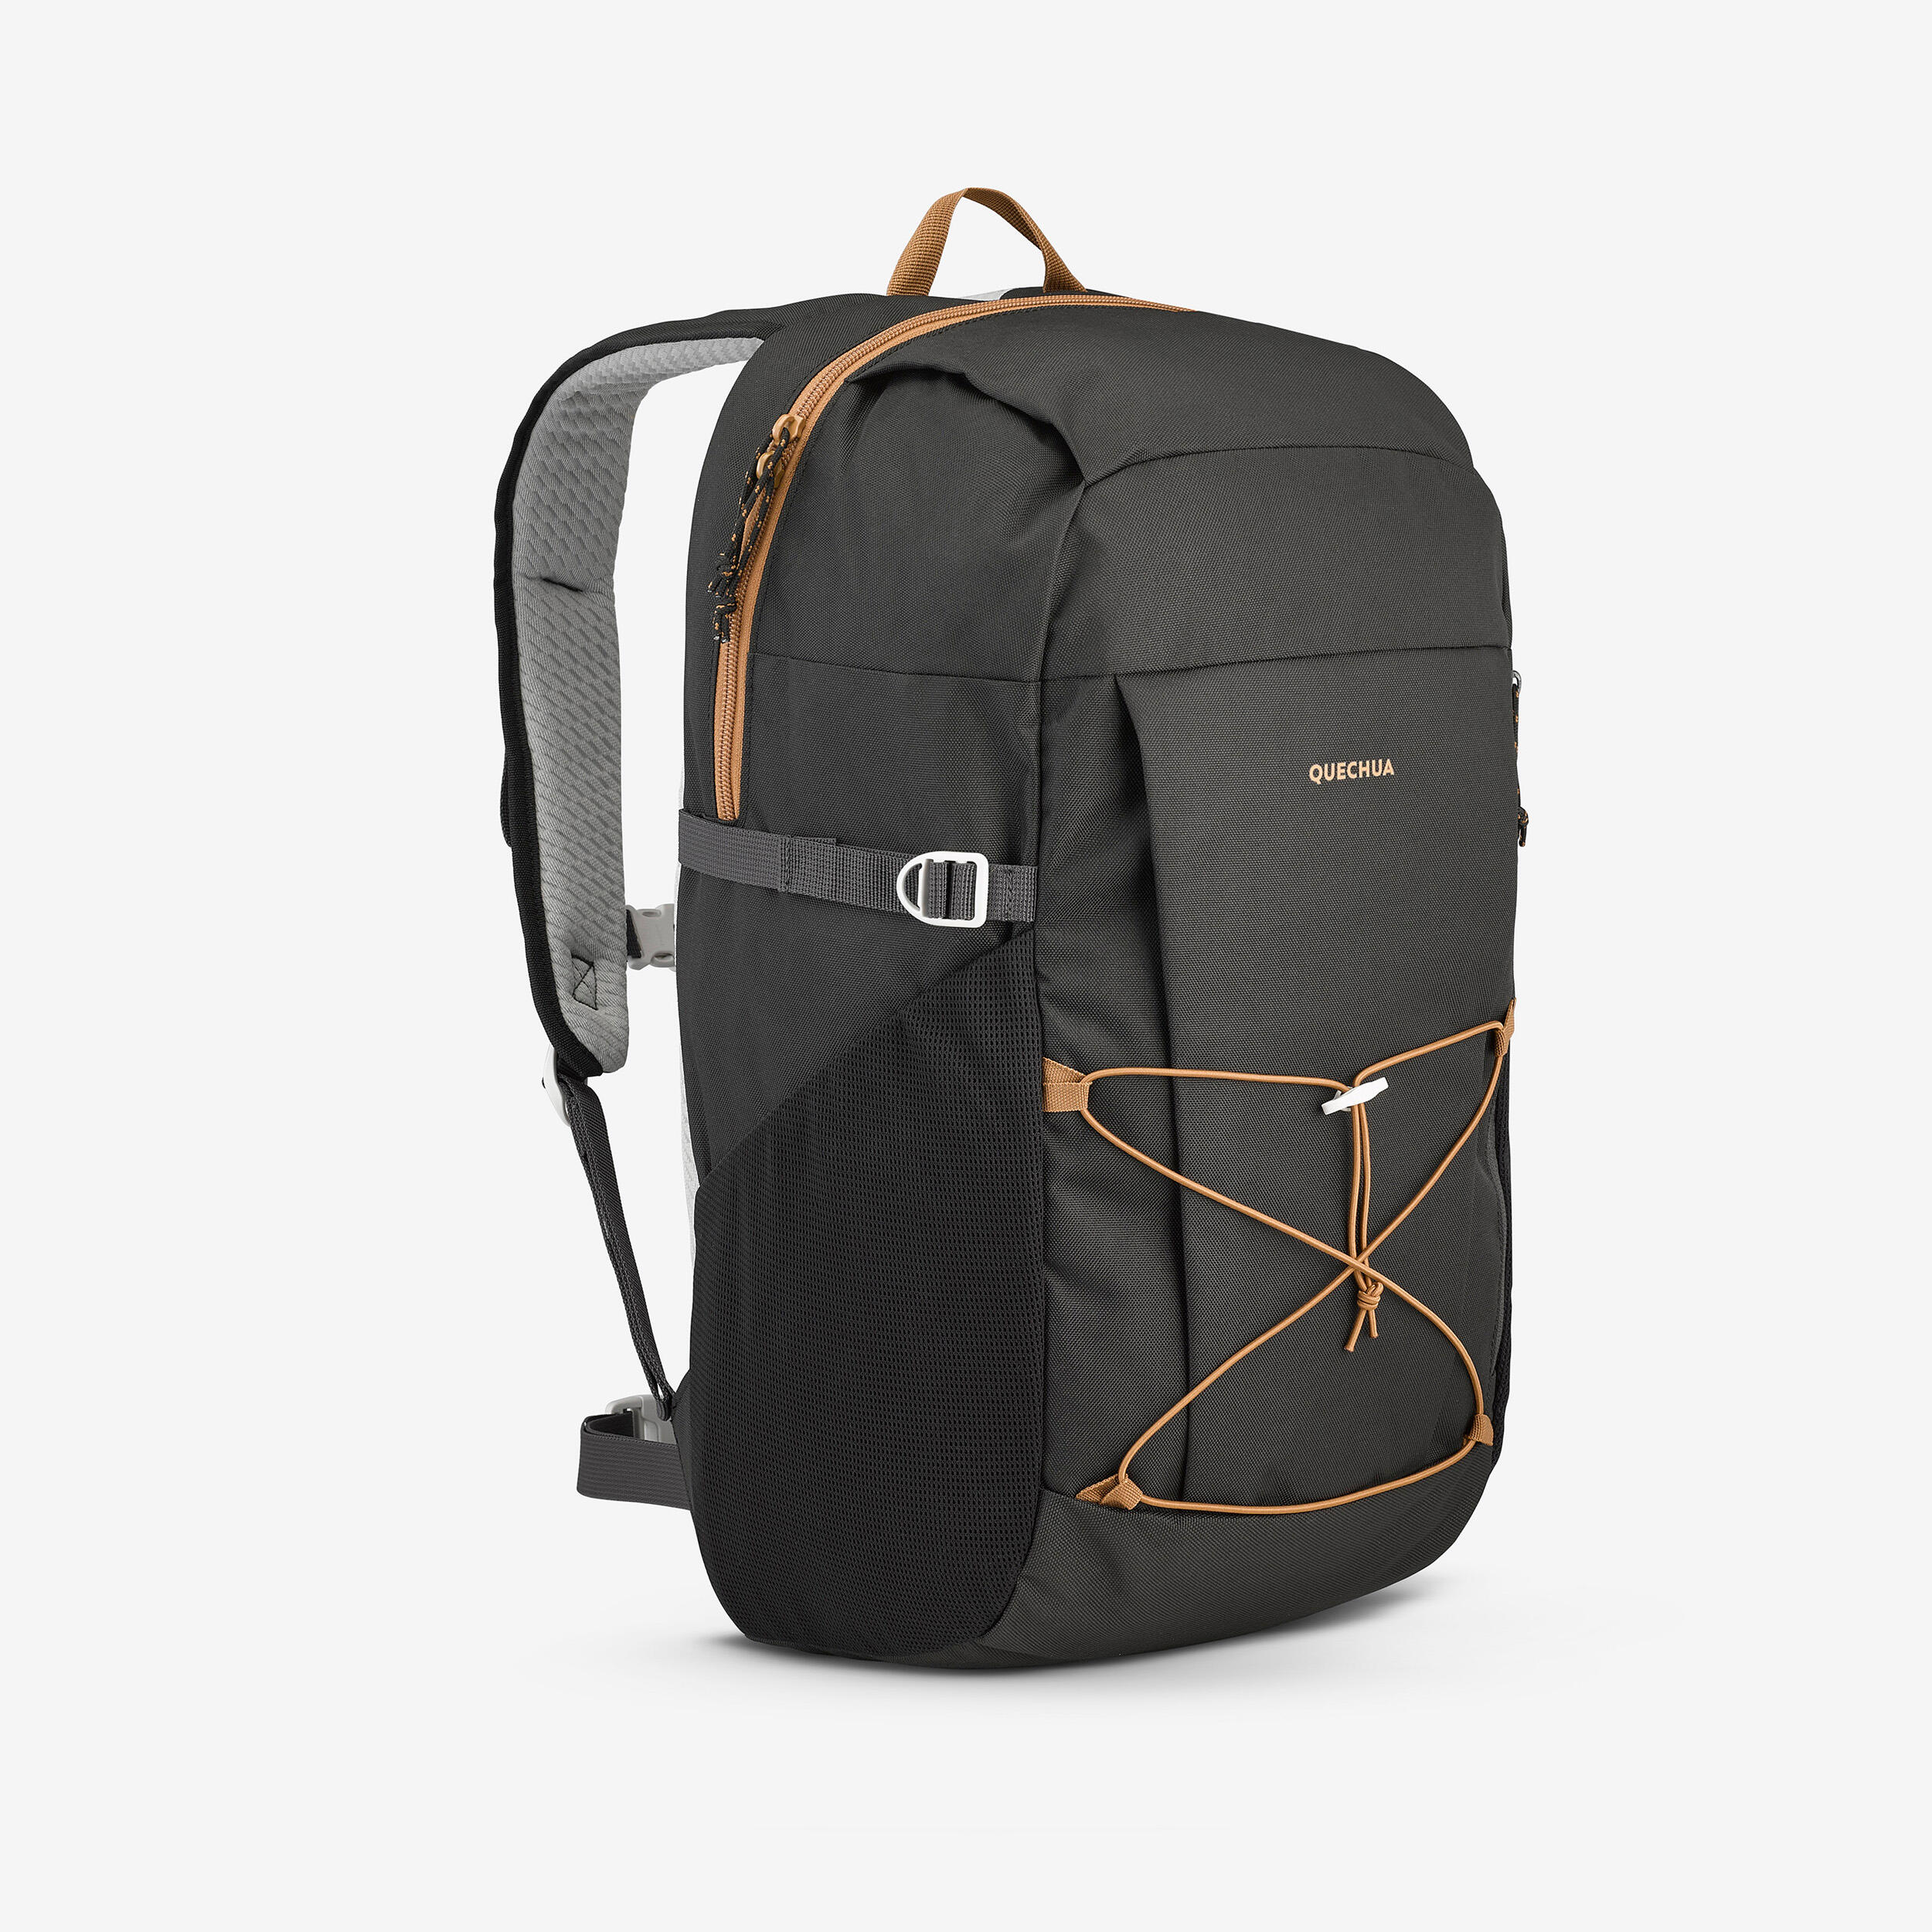 Quechua Hiking Backpack 30l - Nh Arpenaz 100